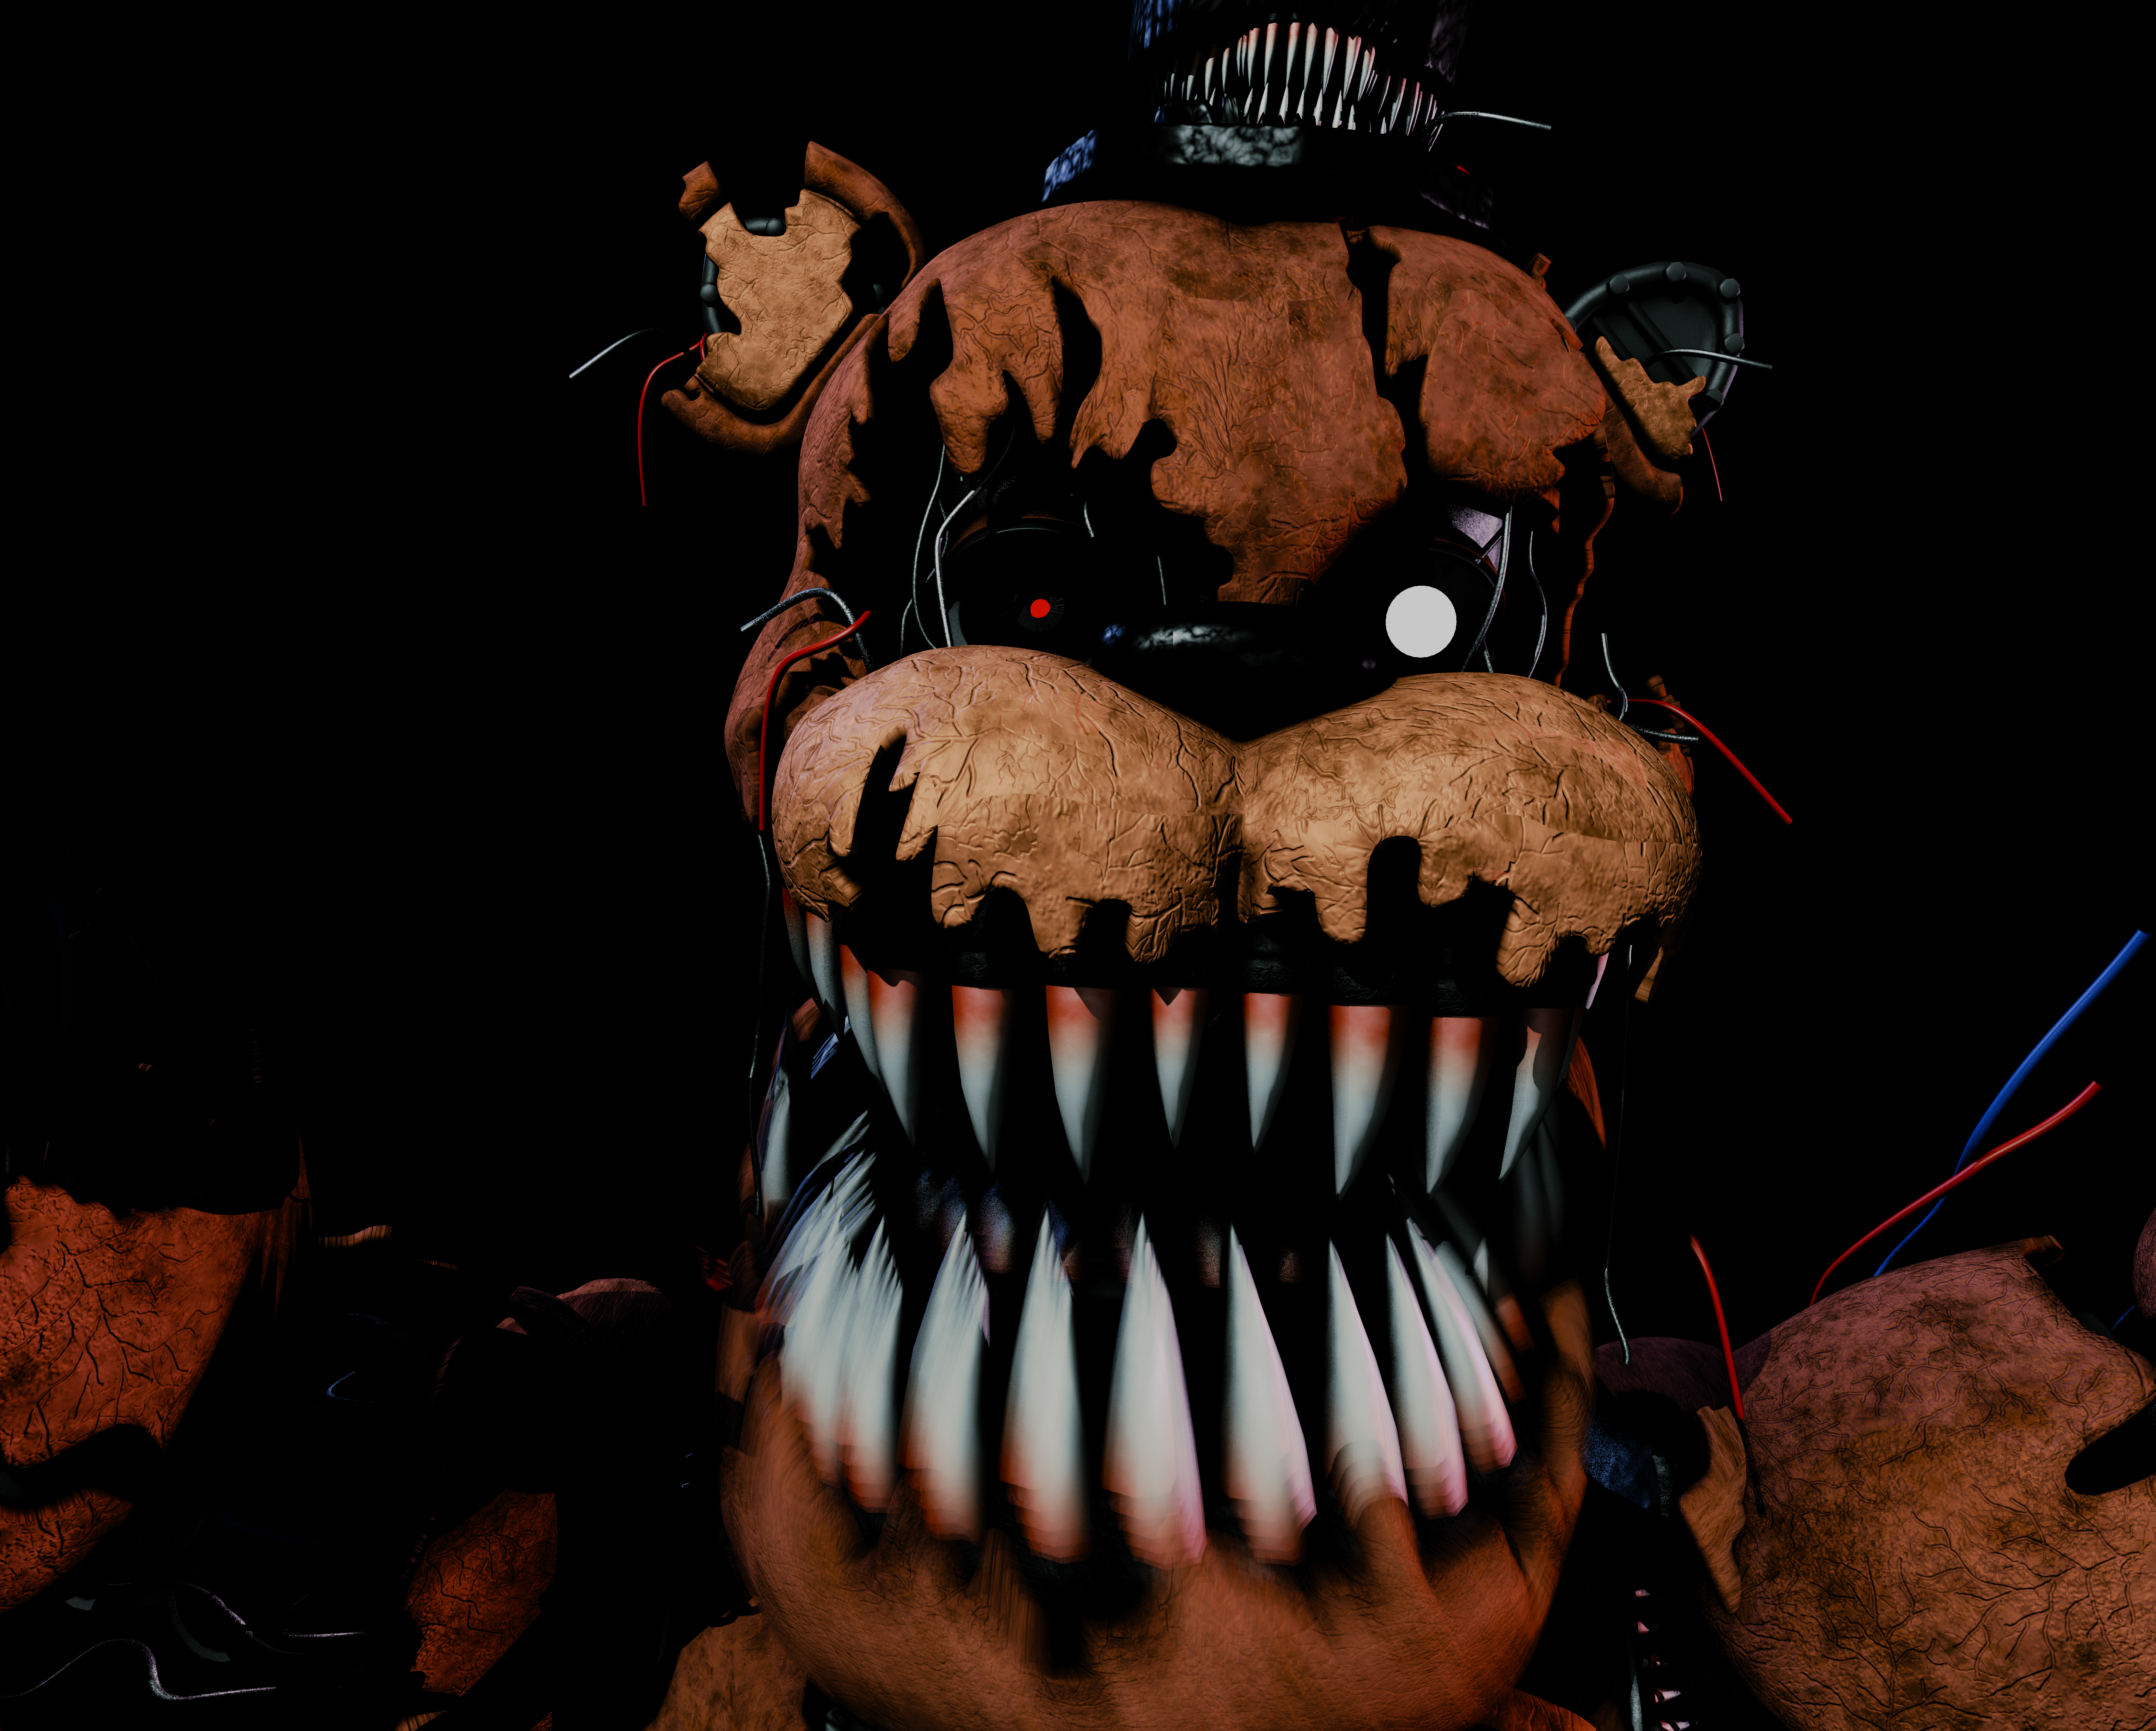 Five Nights At Freddy S 4k Ultra HD Wallpaper Background Image